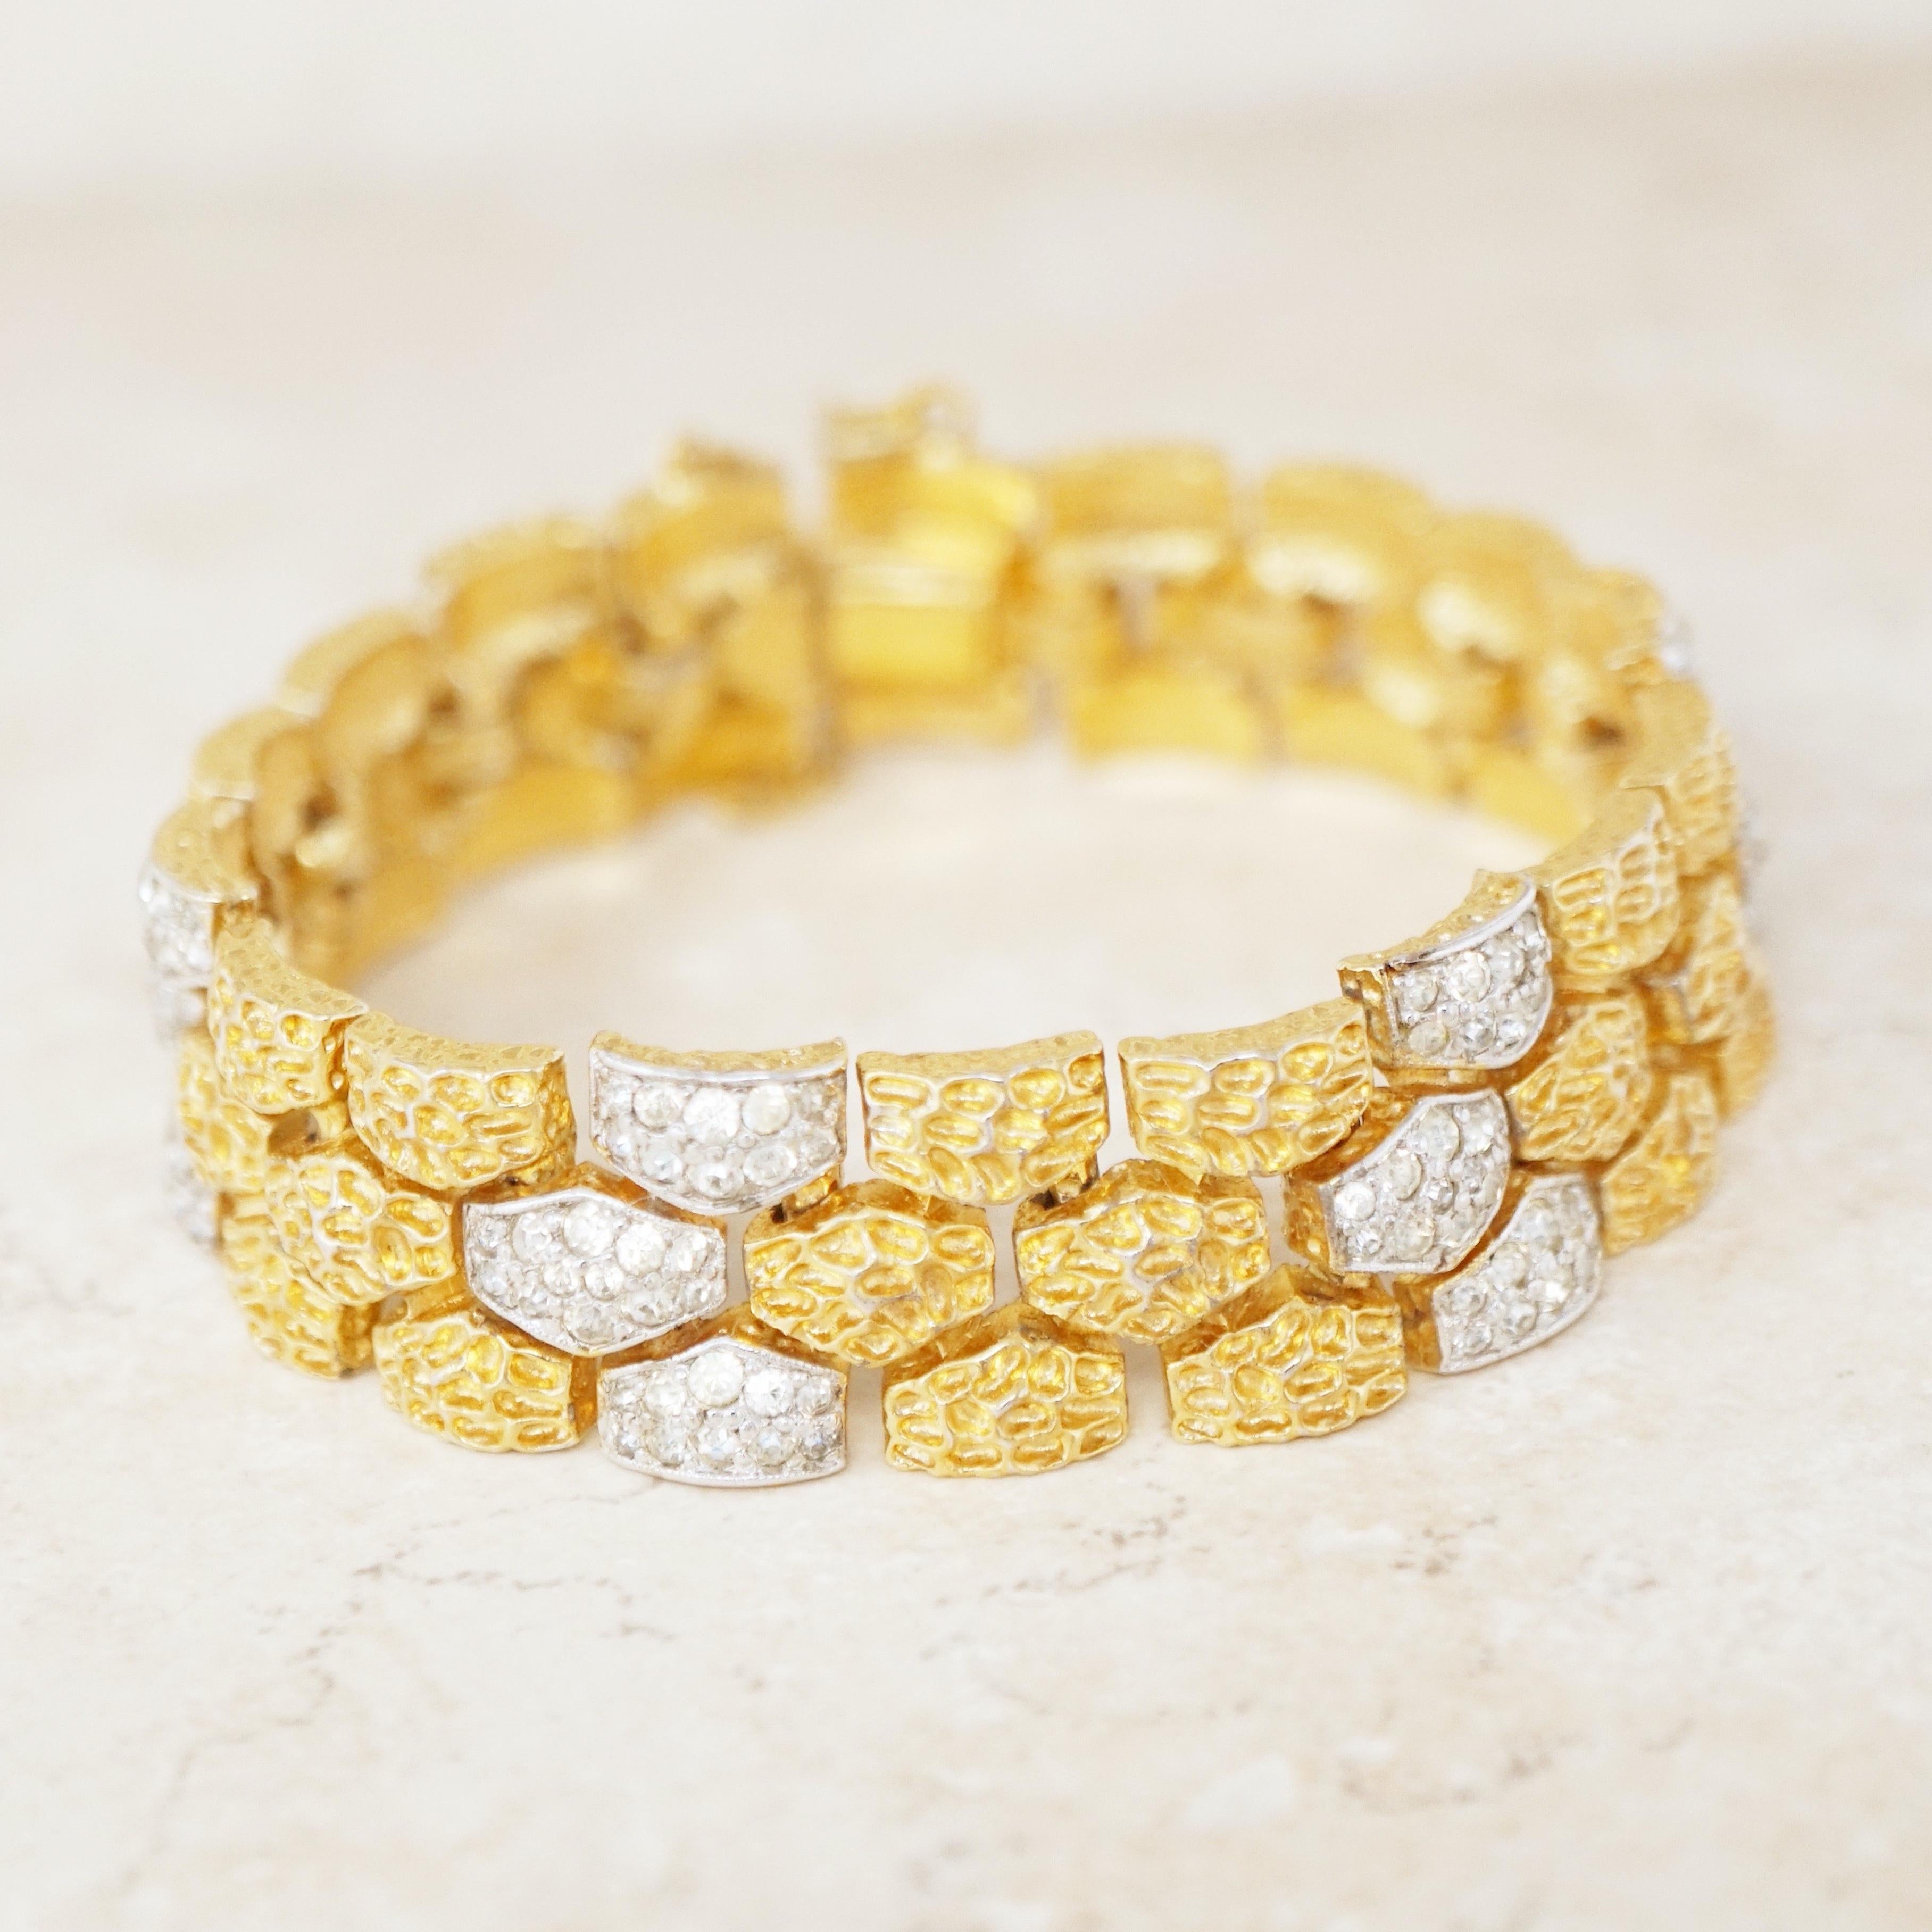 Women's Vintage Two Tone Gilt & Rhinestone Textured Nugget Bracelet by Panetta, 1970s For Sale